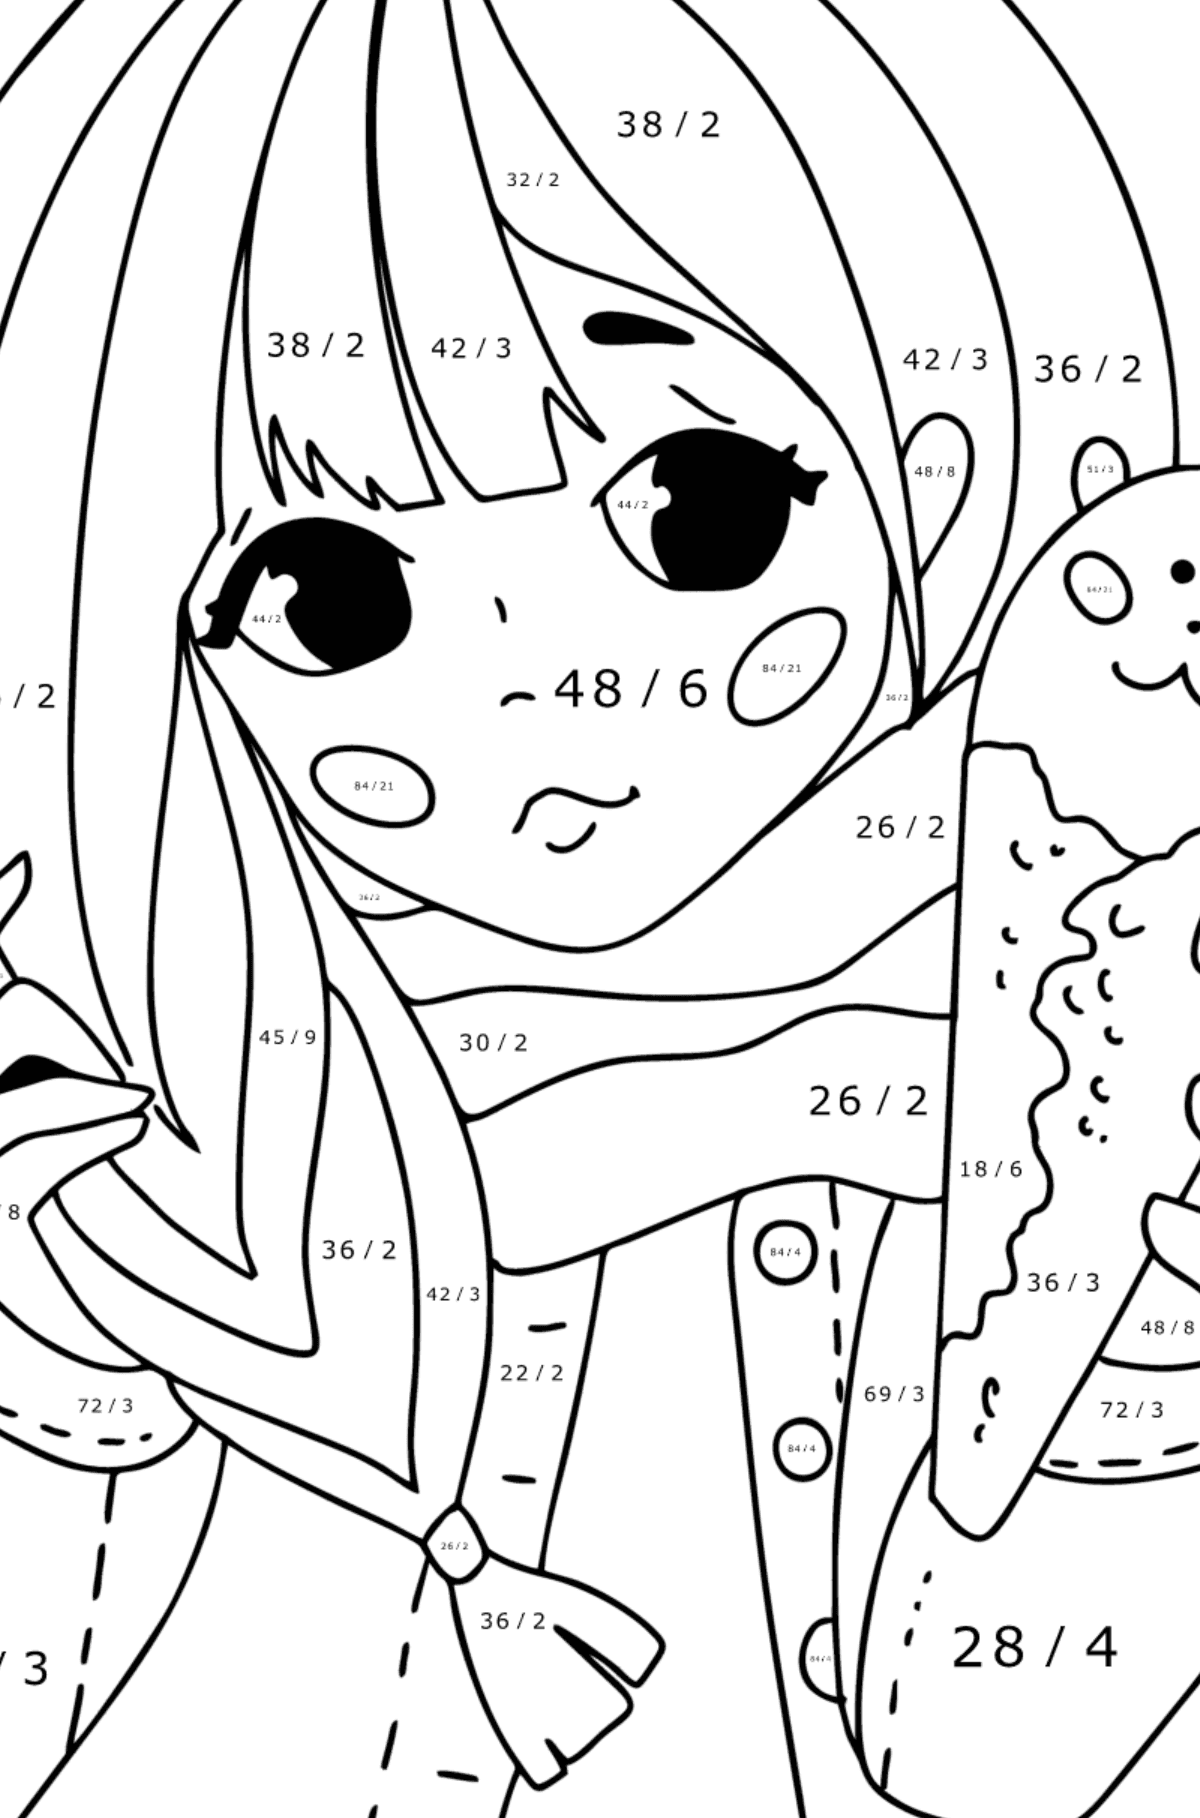 Pretty anime girl coloring page - Math Coloring - Division for Kids